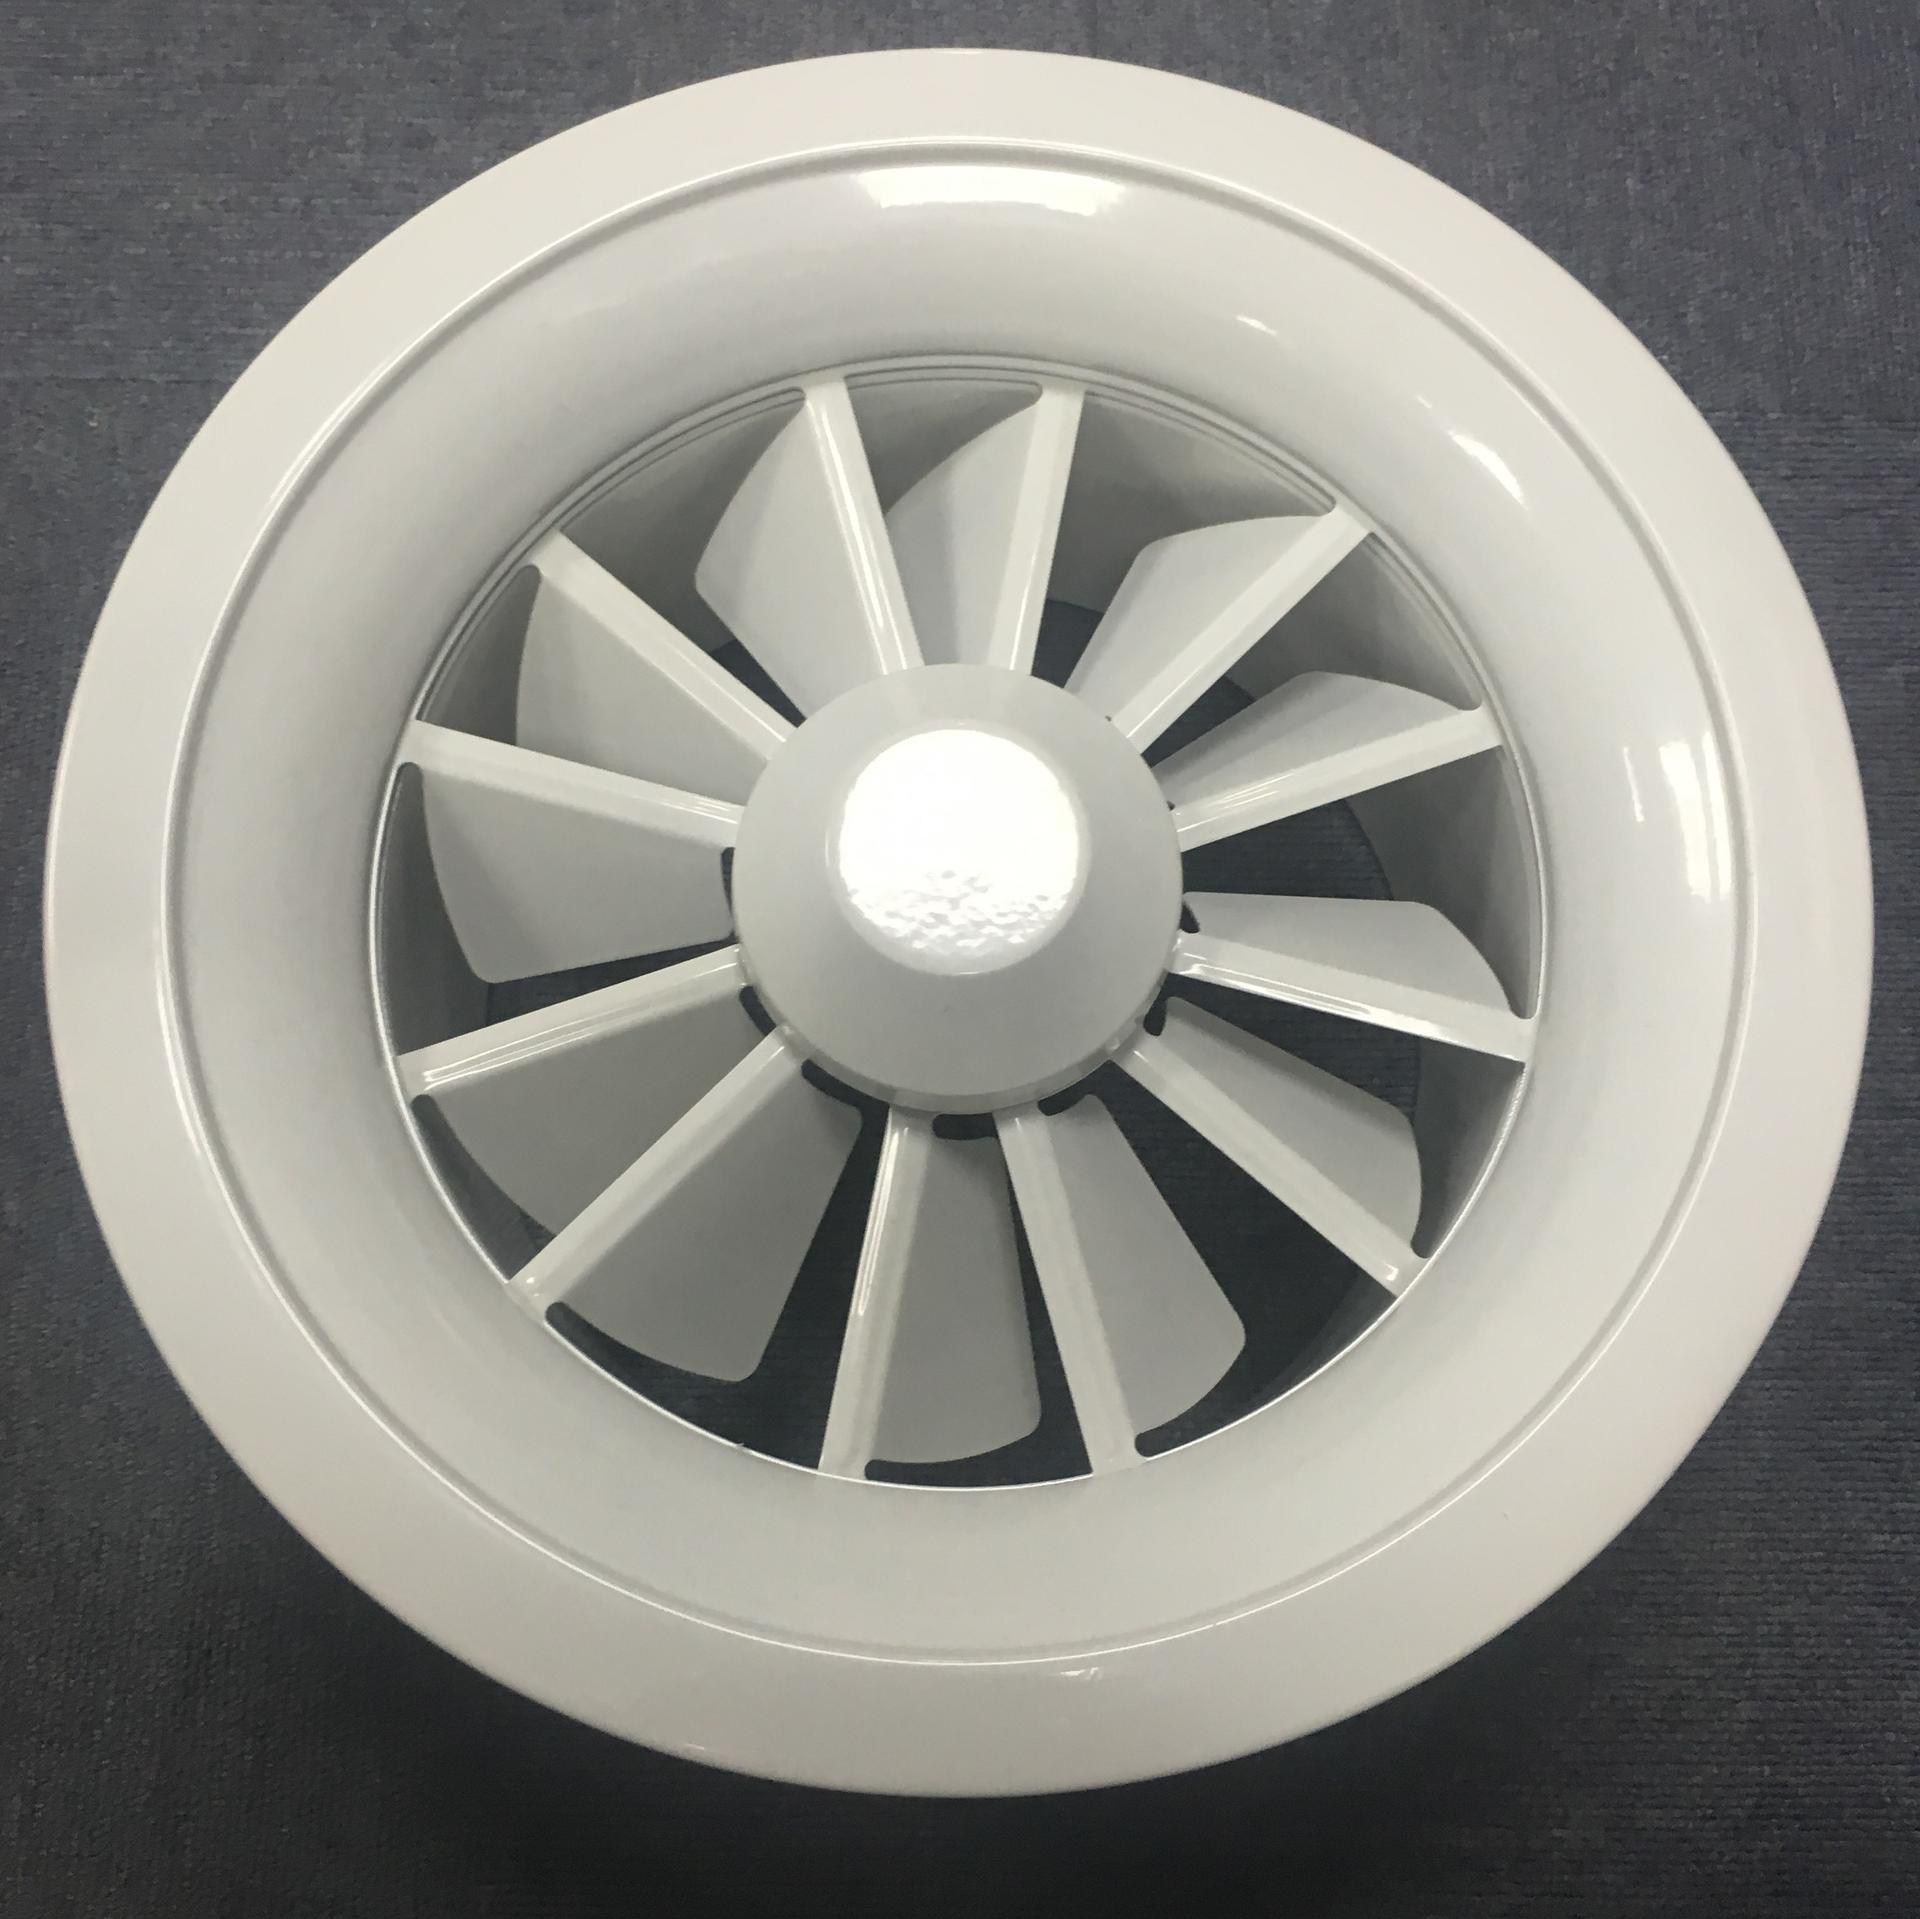 Hvac air duct working volume control damper round swirl diffuser with fixed blades